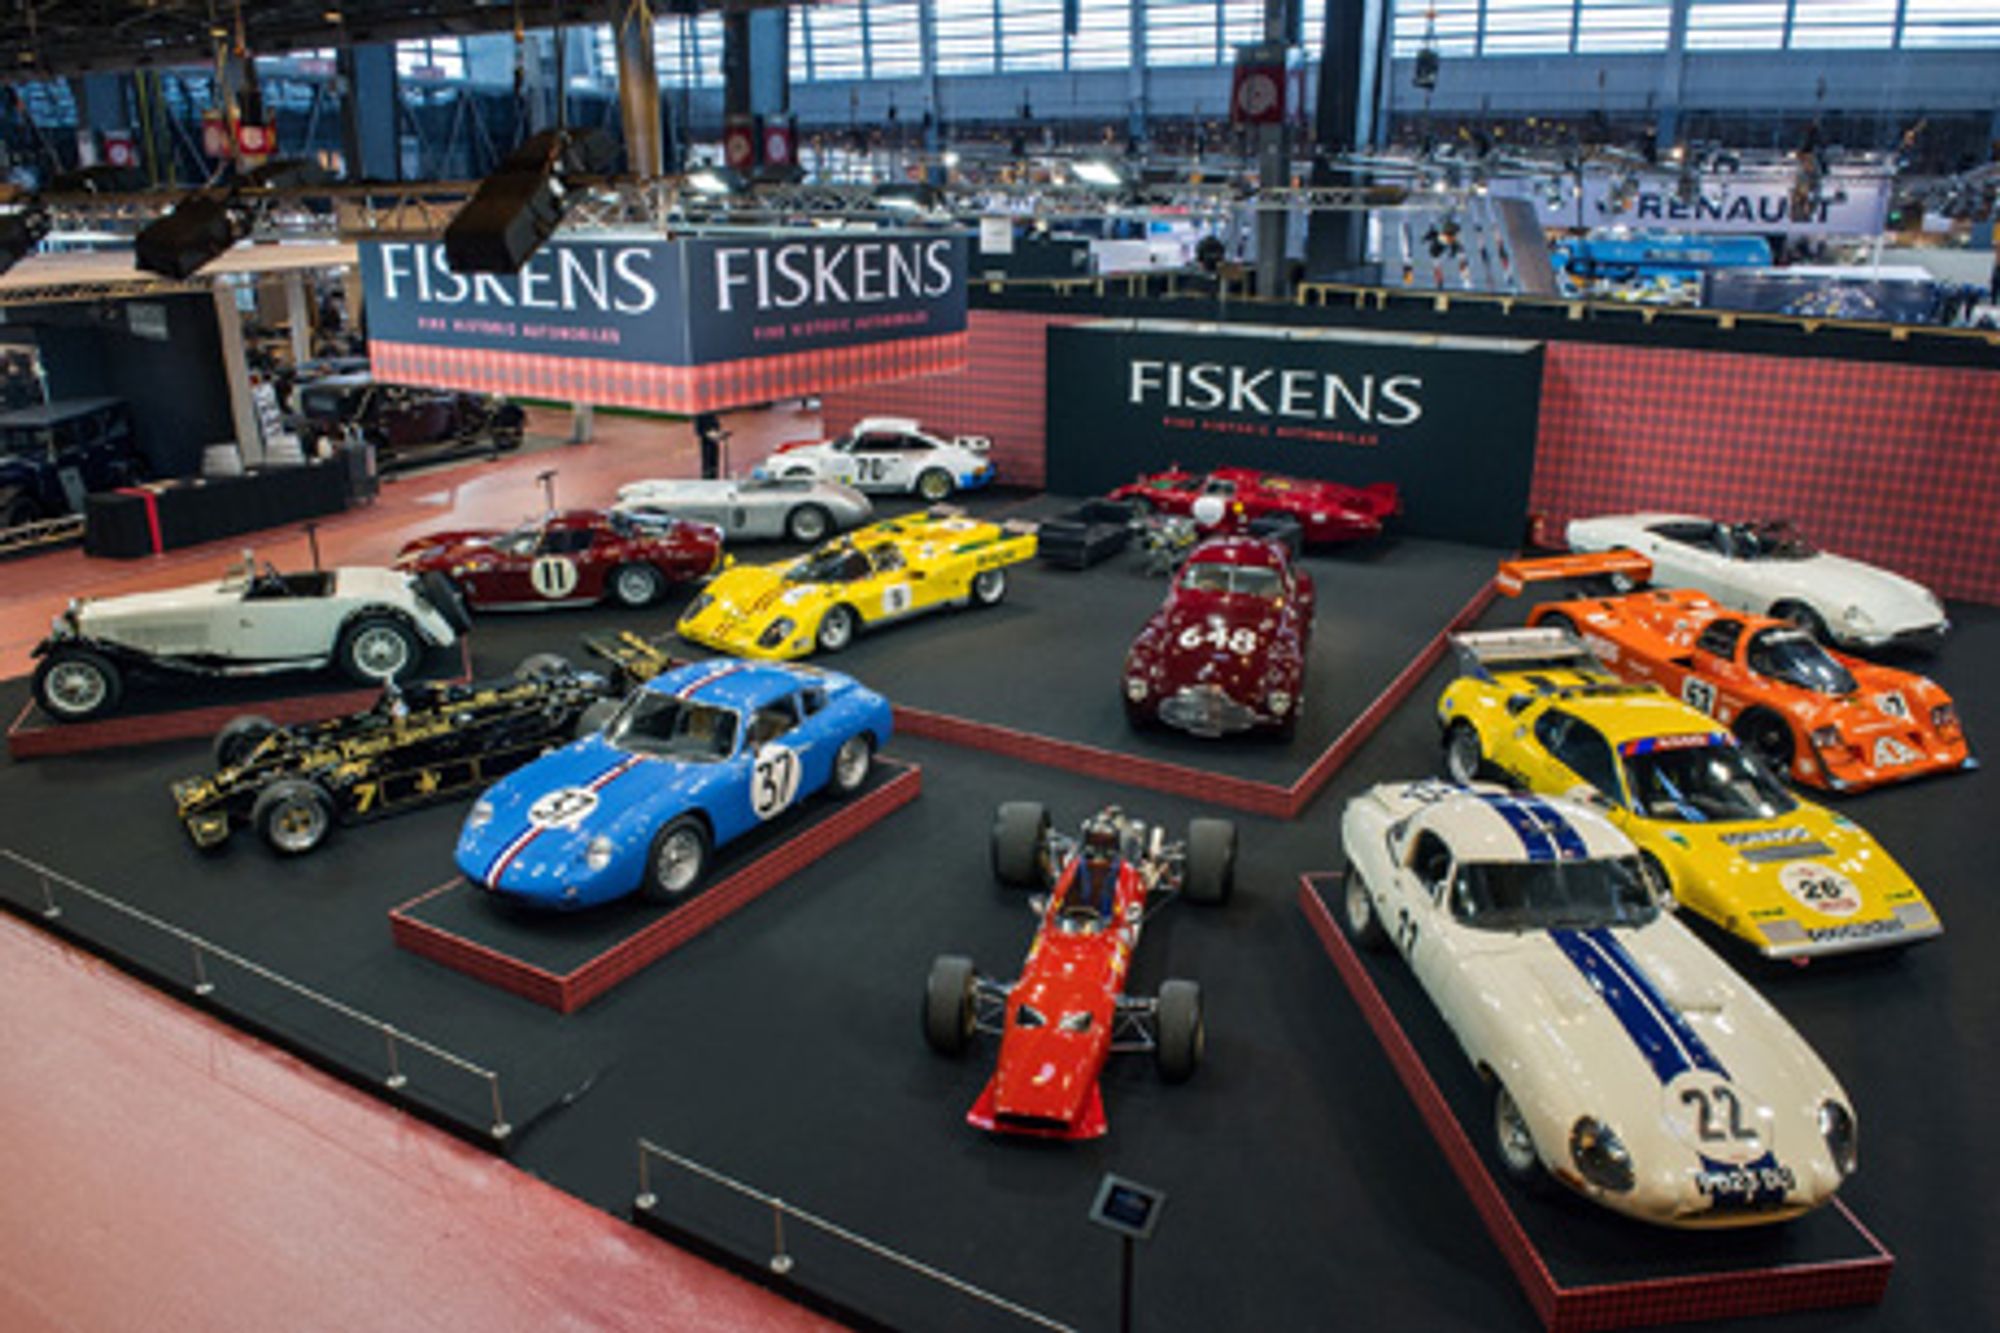 Let your car take the spotlight at Rétromobile 2017: Fiskens plans a fabulous 25th anniversary display at Europe’s premier show